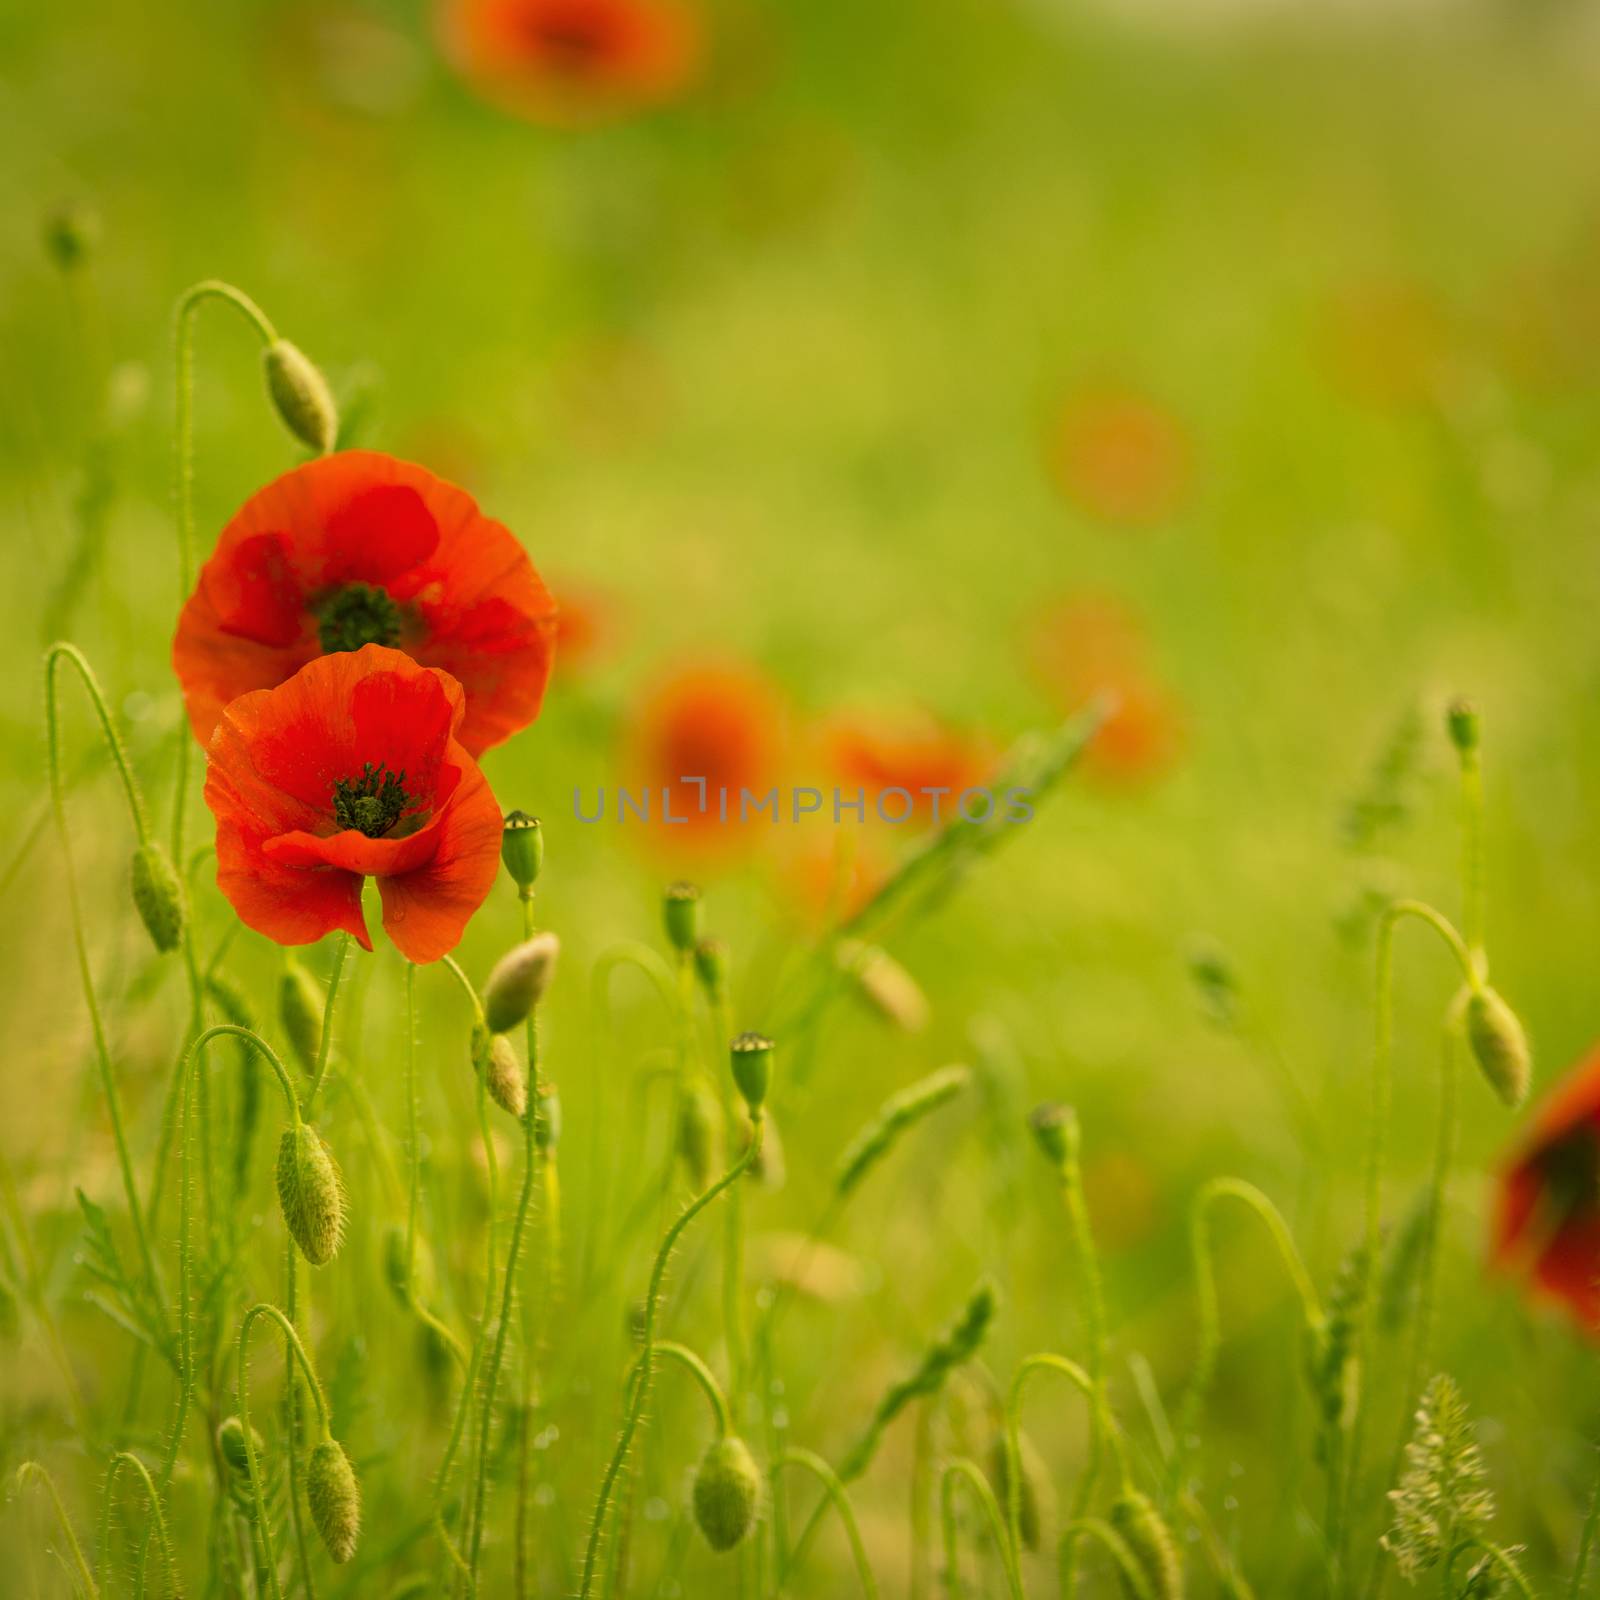 Field of poppies with green and red colors, nature background.